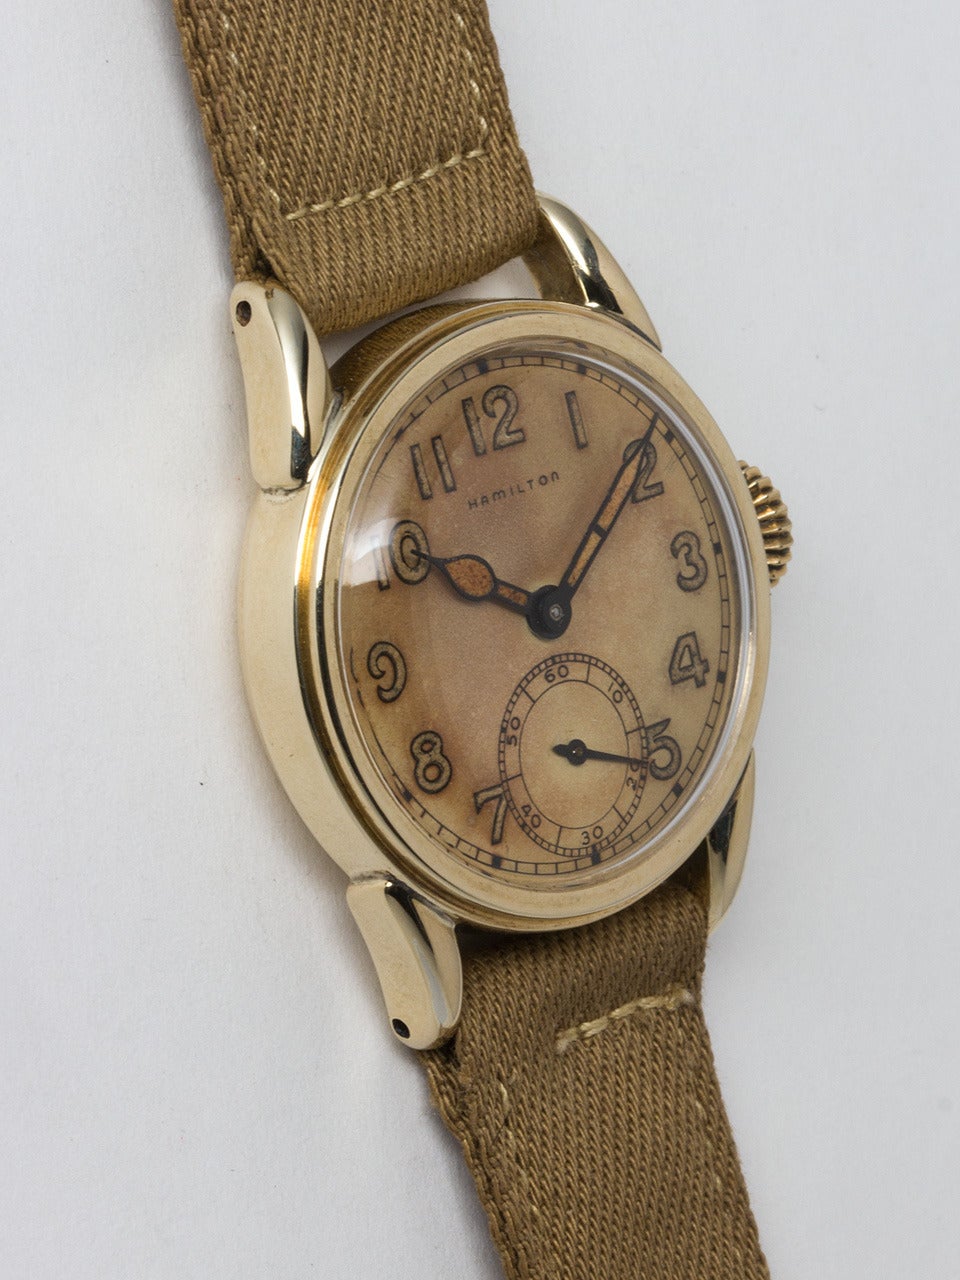 Hamilton Yellow Gold Filled Military Style Wristwatch circa 1940s. 29 x 36mm snap back case, very pleasing richly patina'd luminous arabic figures dial and hands. 17 jewel manual wind calibre 987A movement with subsidiary seconds. Fitted with new